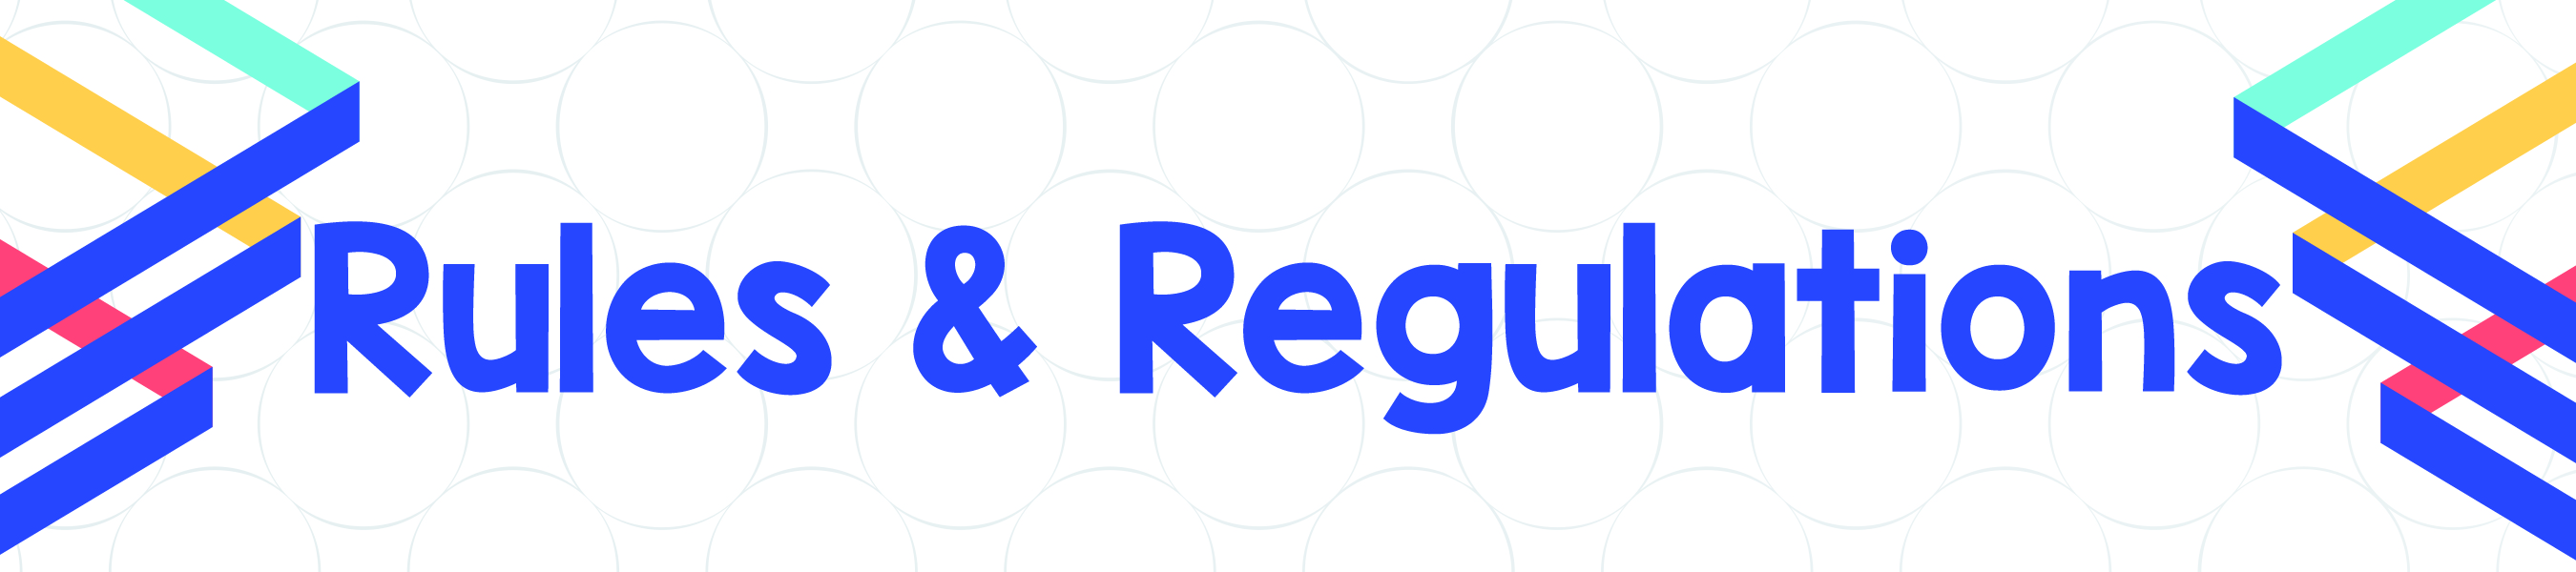 Rules and Regulations graphic header